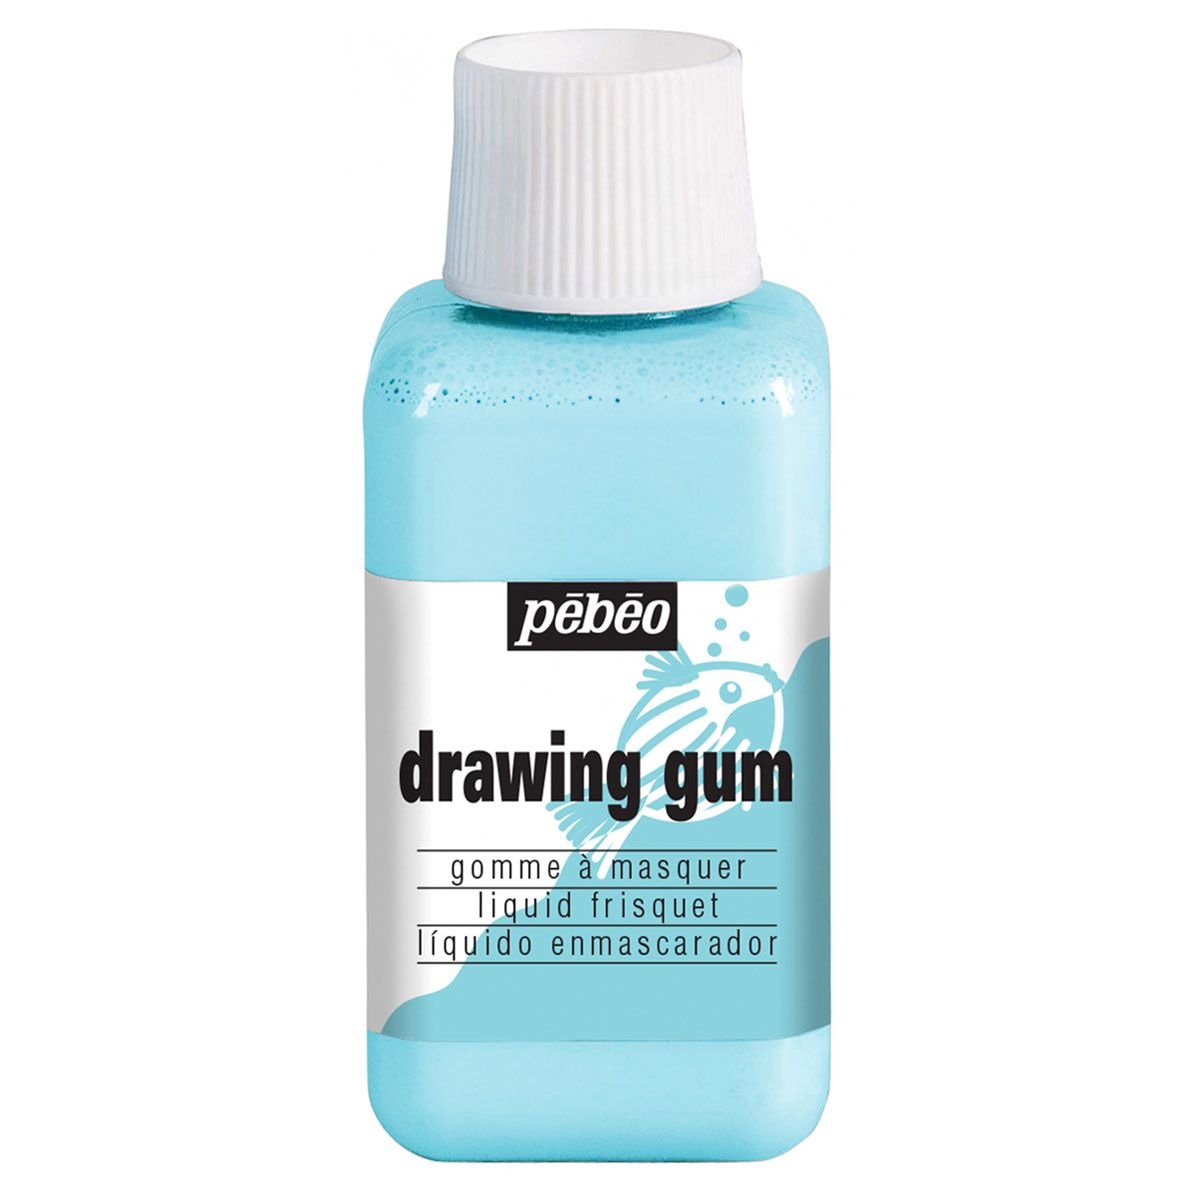 An Illustration made with Drawing Gum